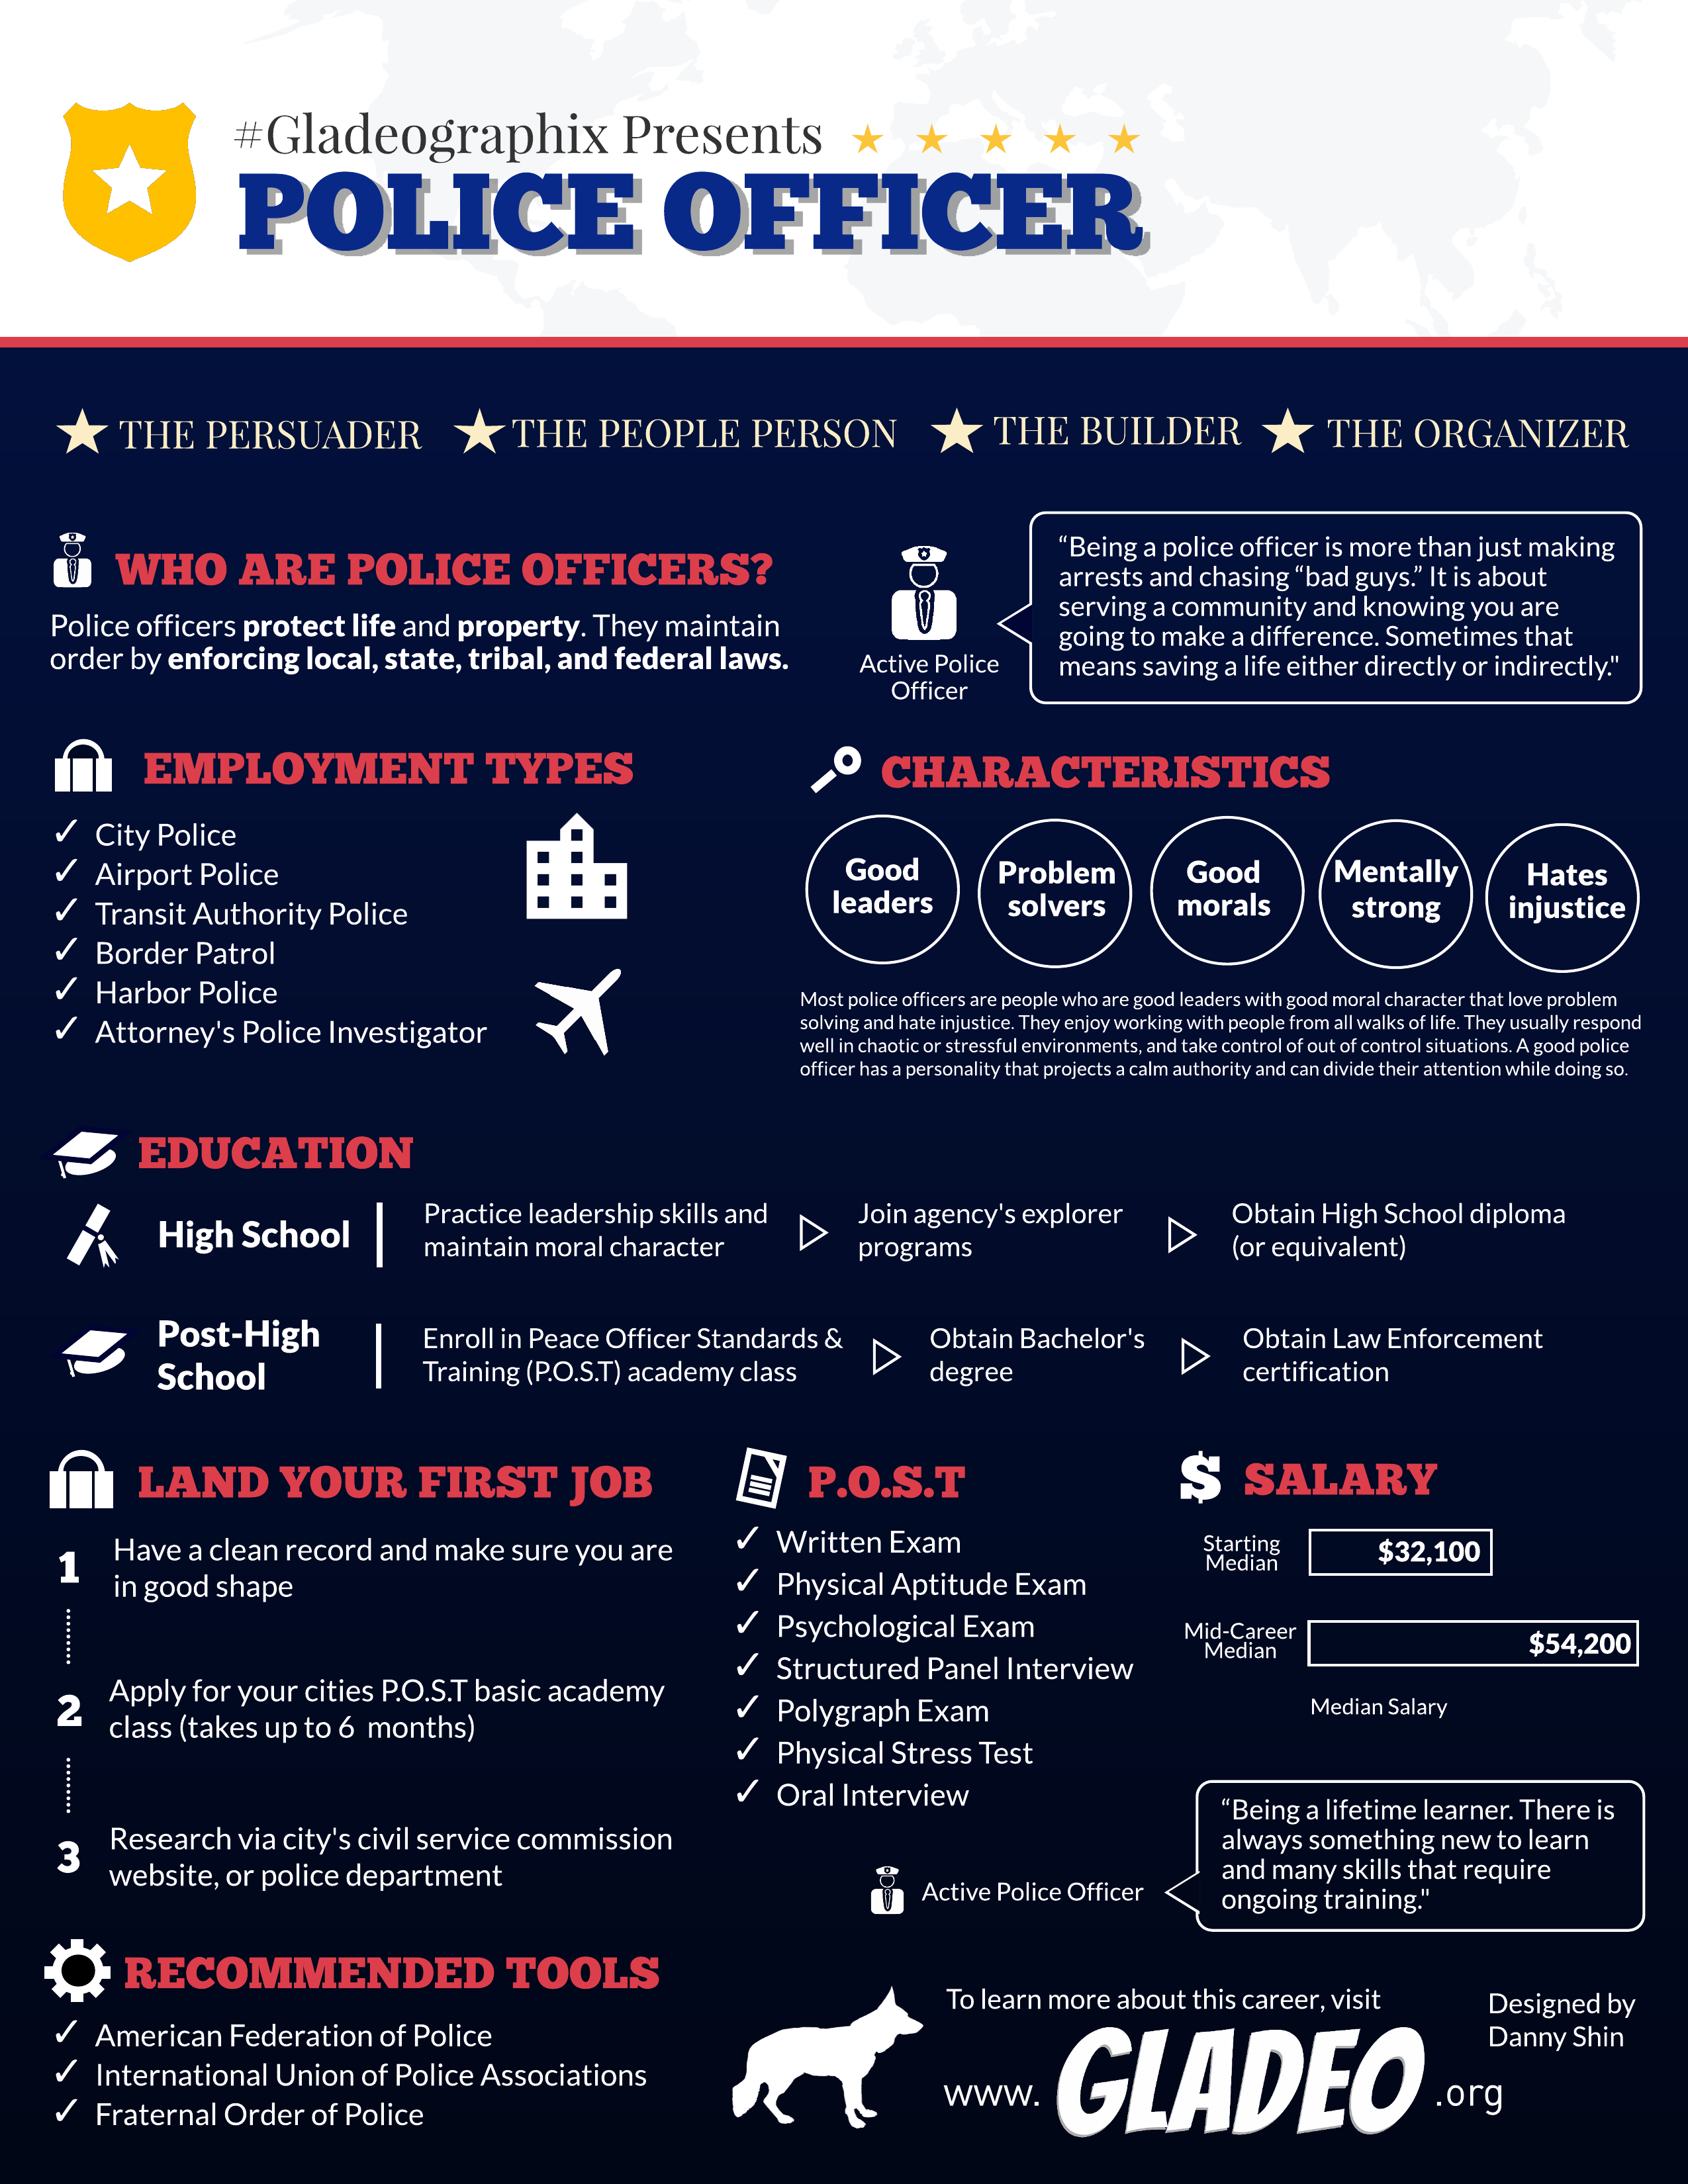 Police officer infographic